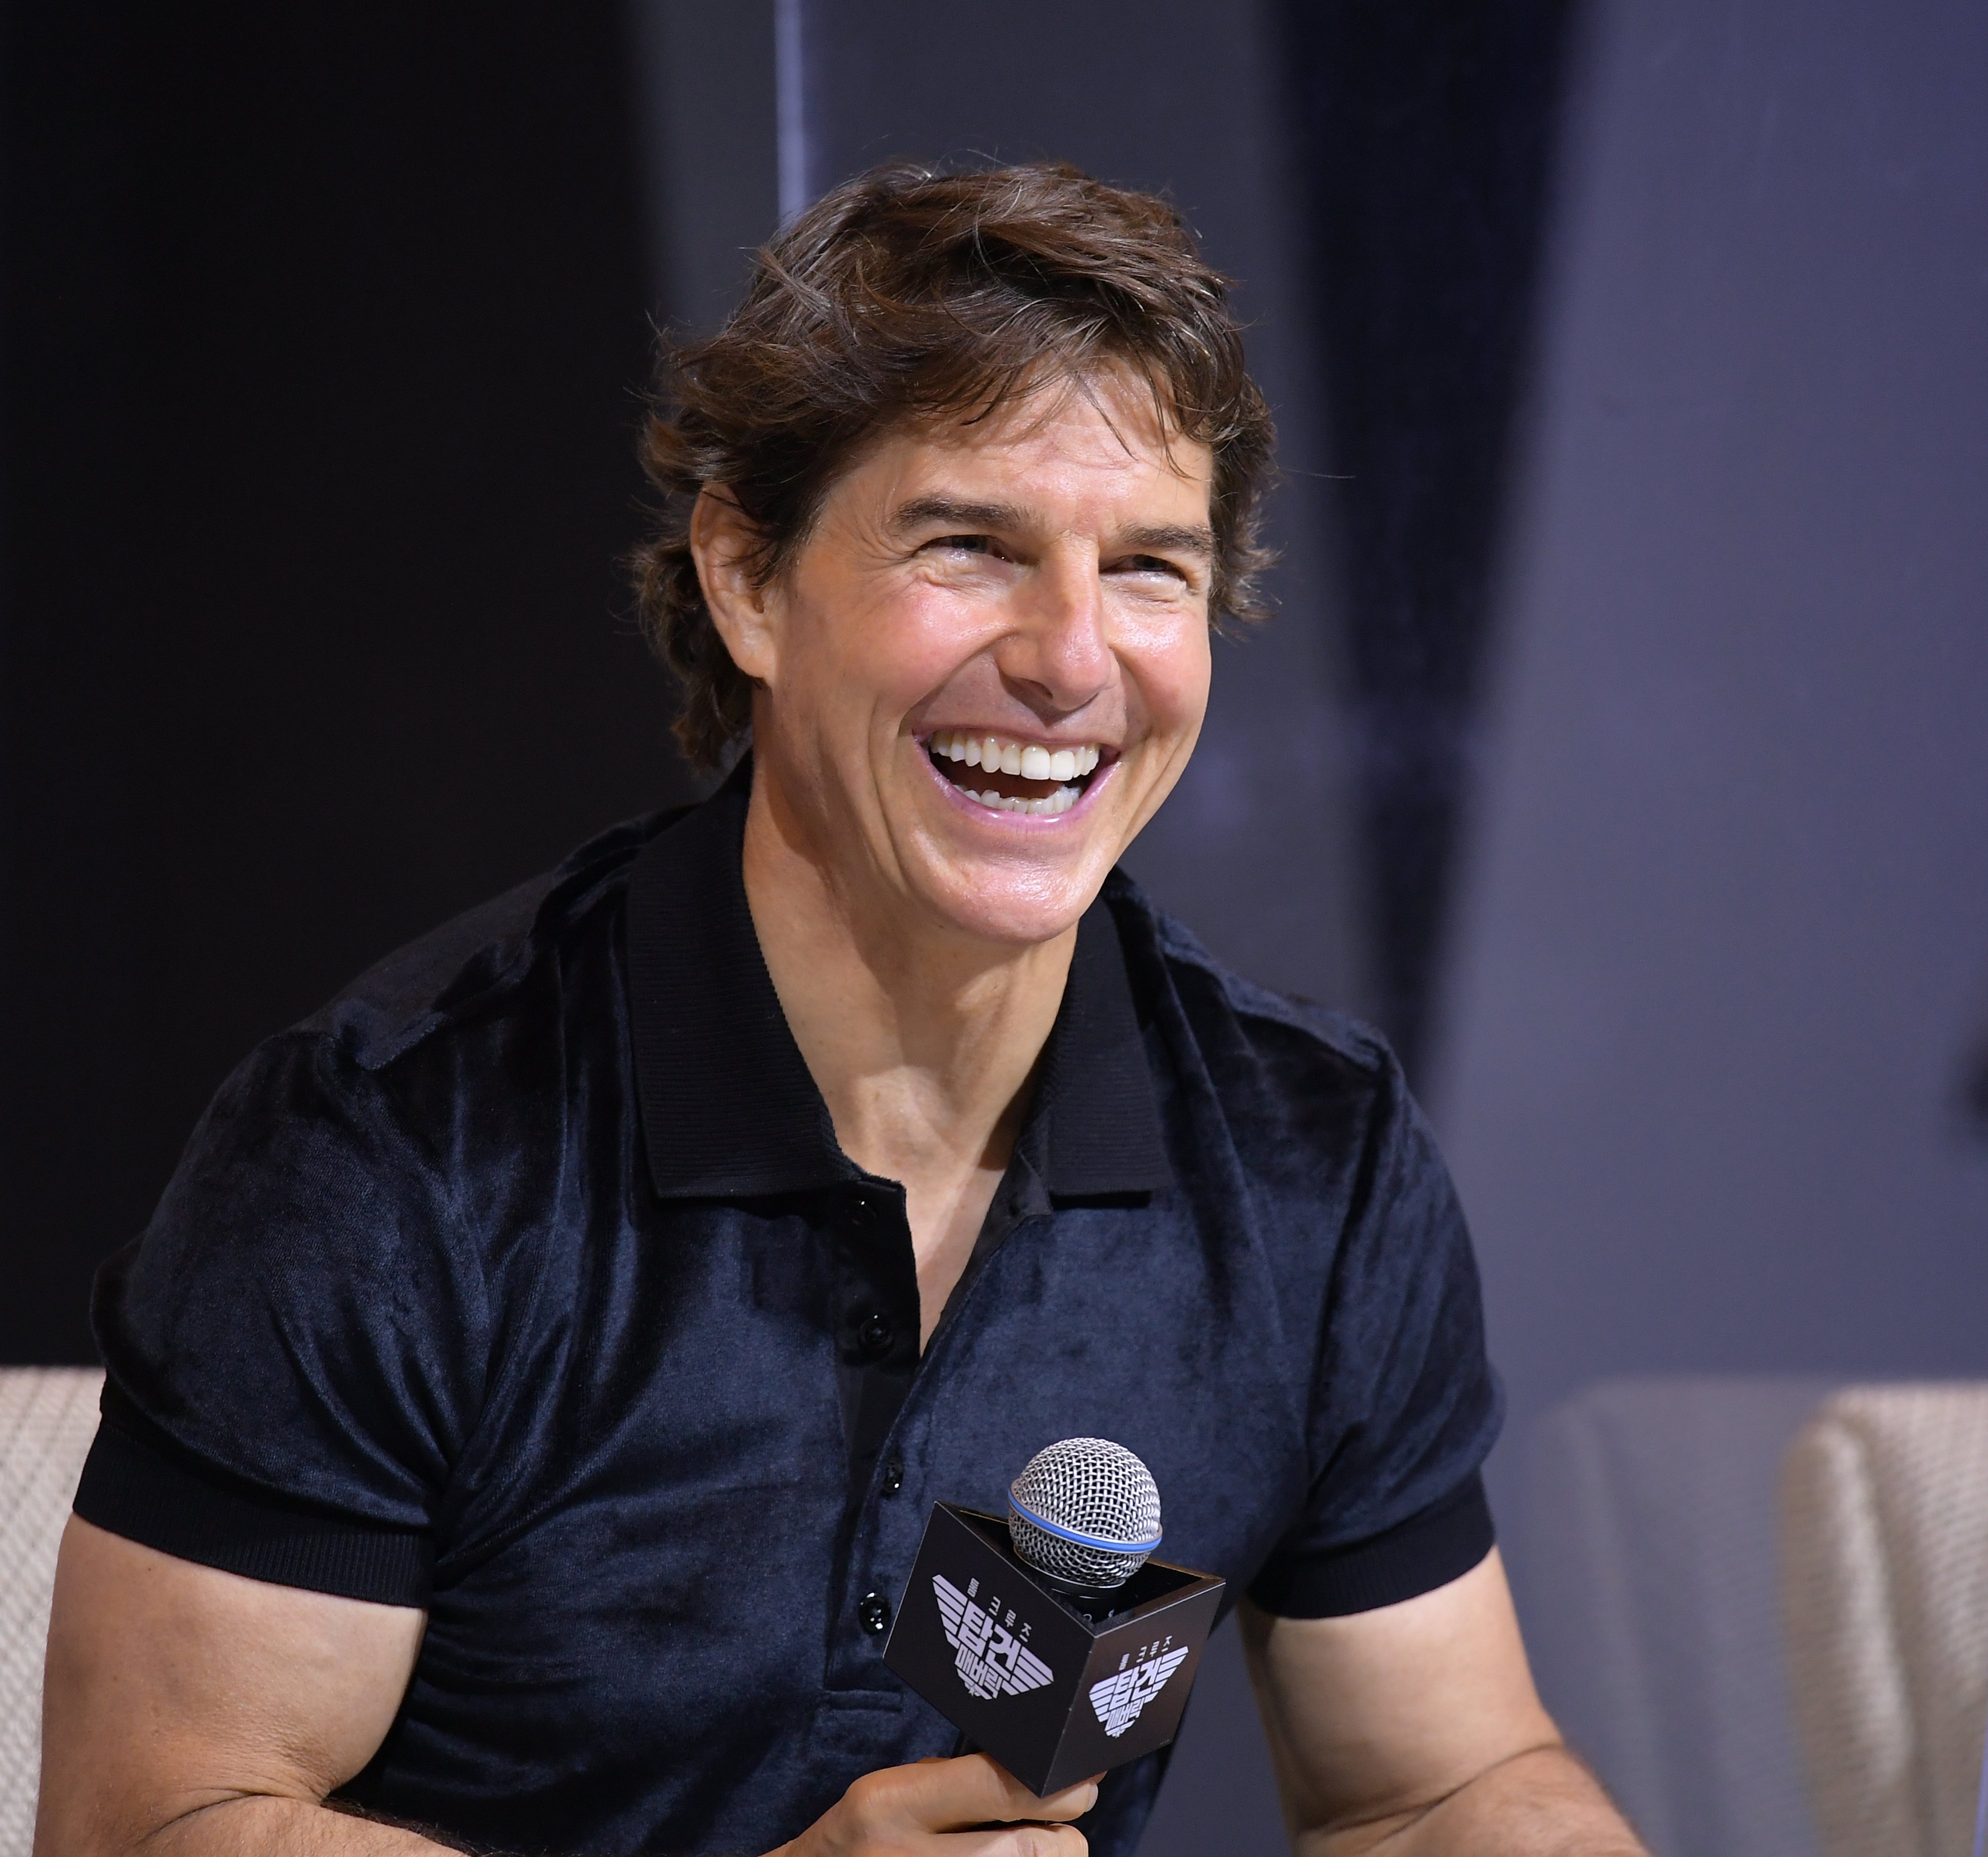 Tom Cruise during a press conference of the movie 'Top Gun: Maverick' in Seoul, South Korea in June 2022. | Source: Getty Images